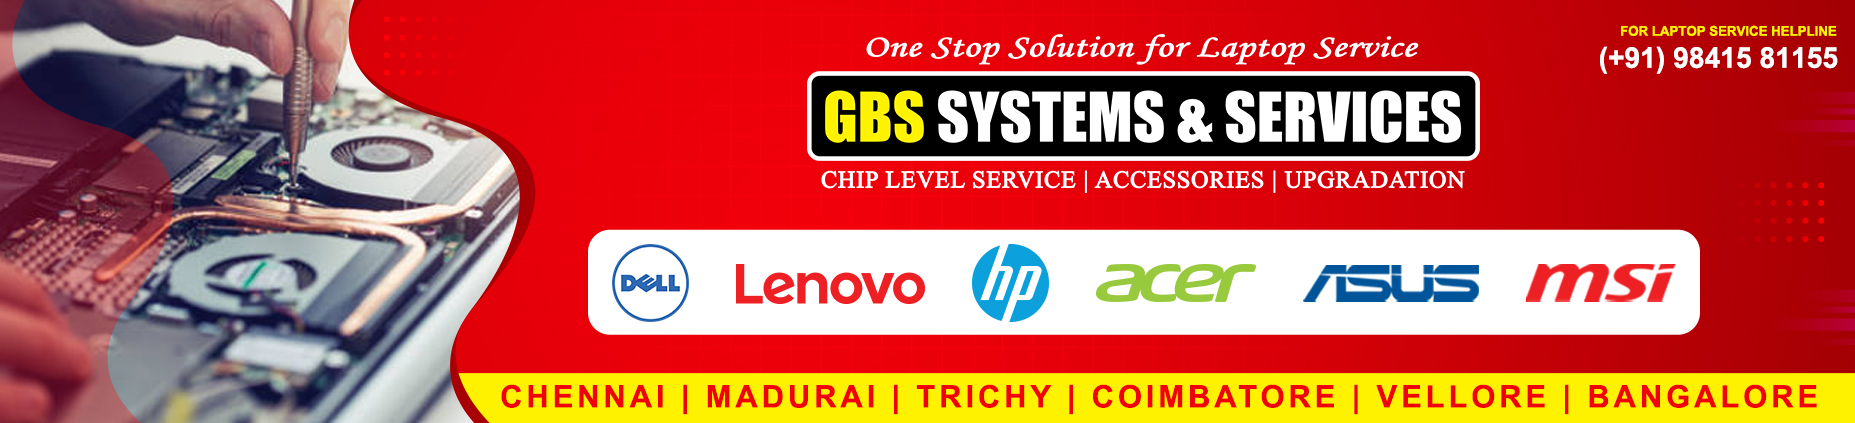 laptop service center in trichy